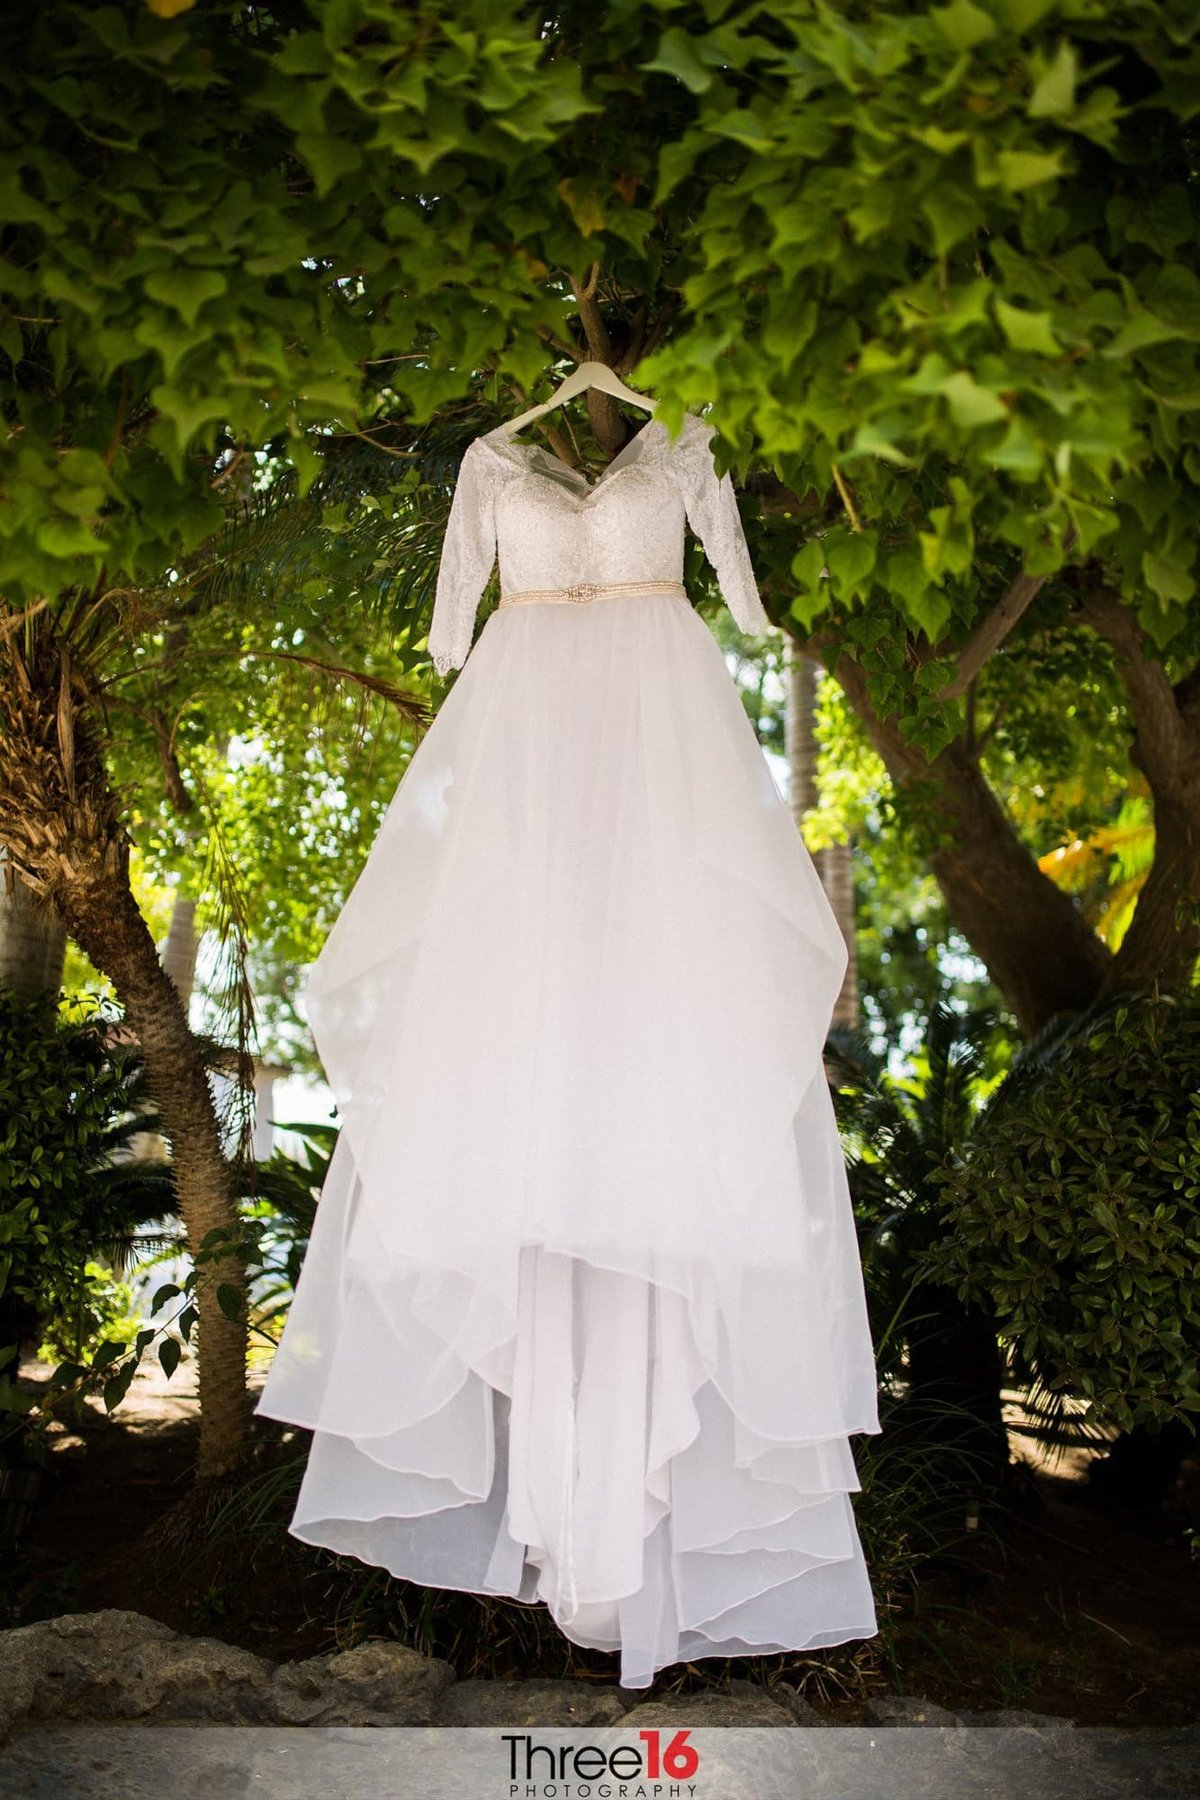 Brides wedding gown hanging from a tree